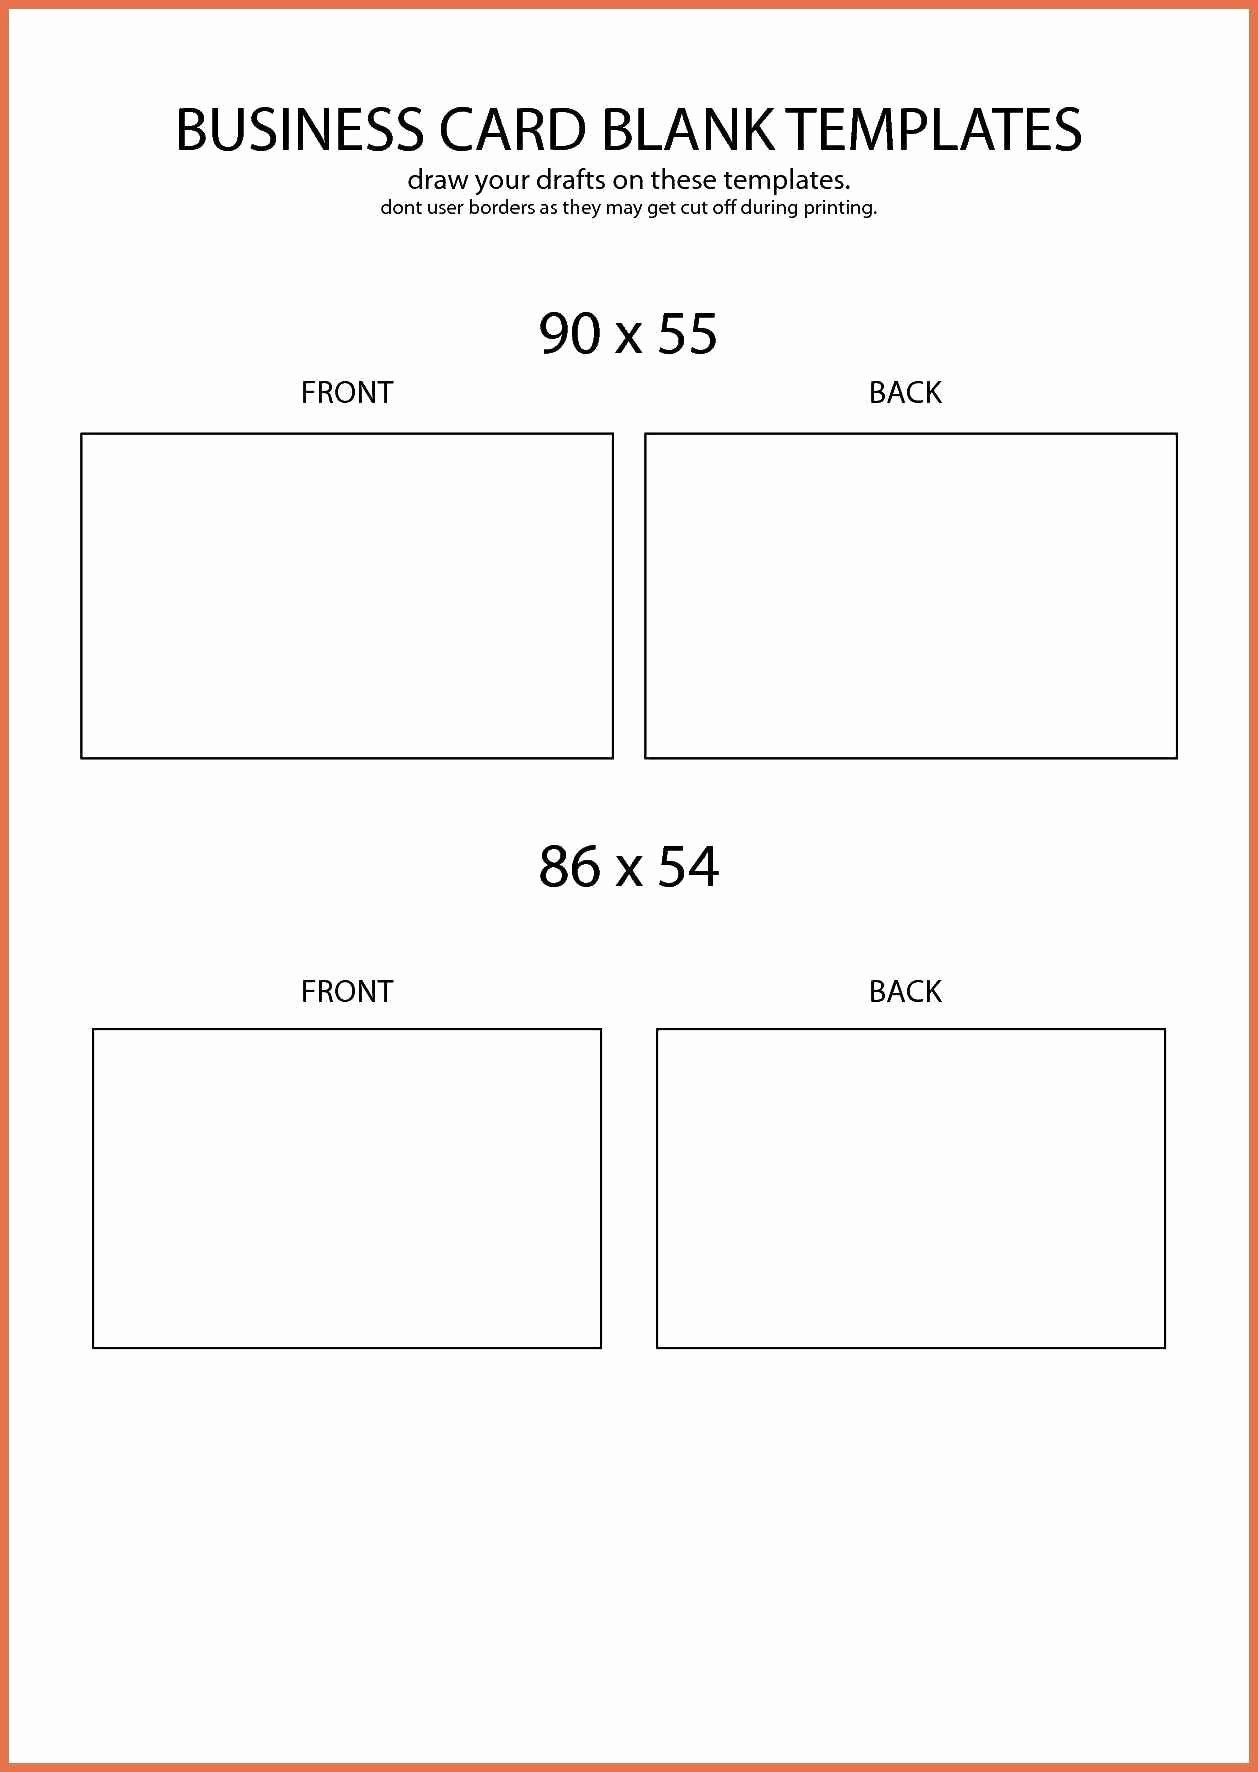 Pin On Business Cardsbusinesscardsdesignideas In Template For Cards In Word